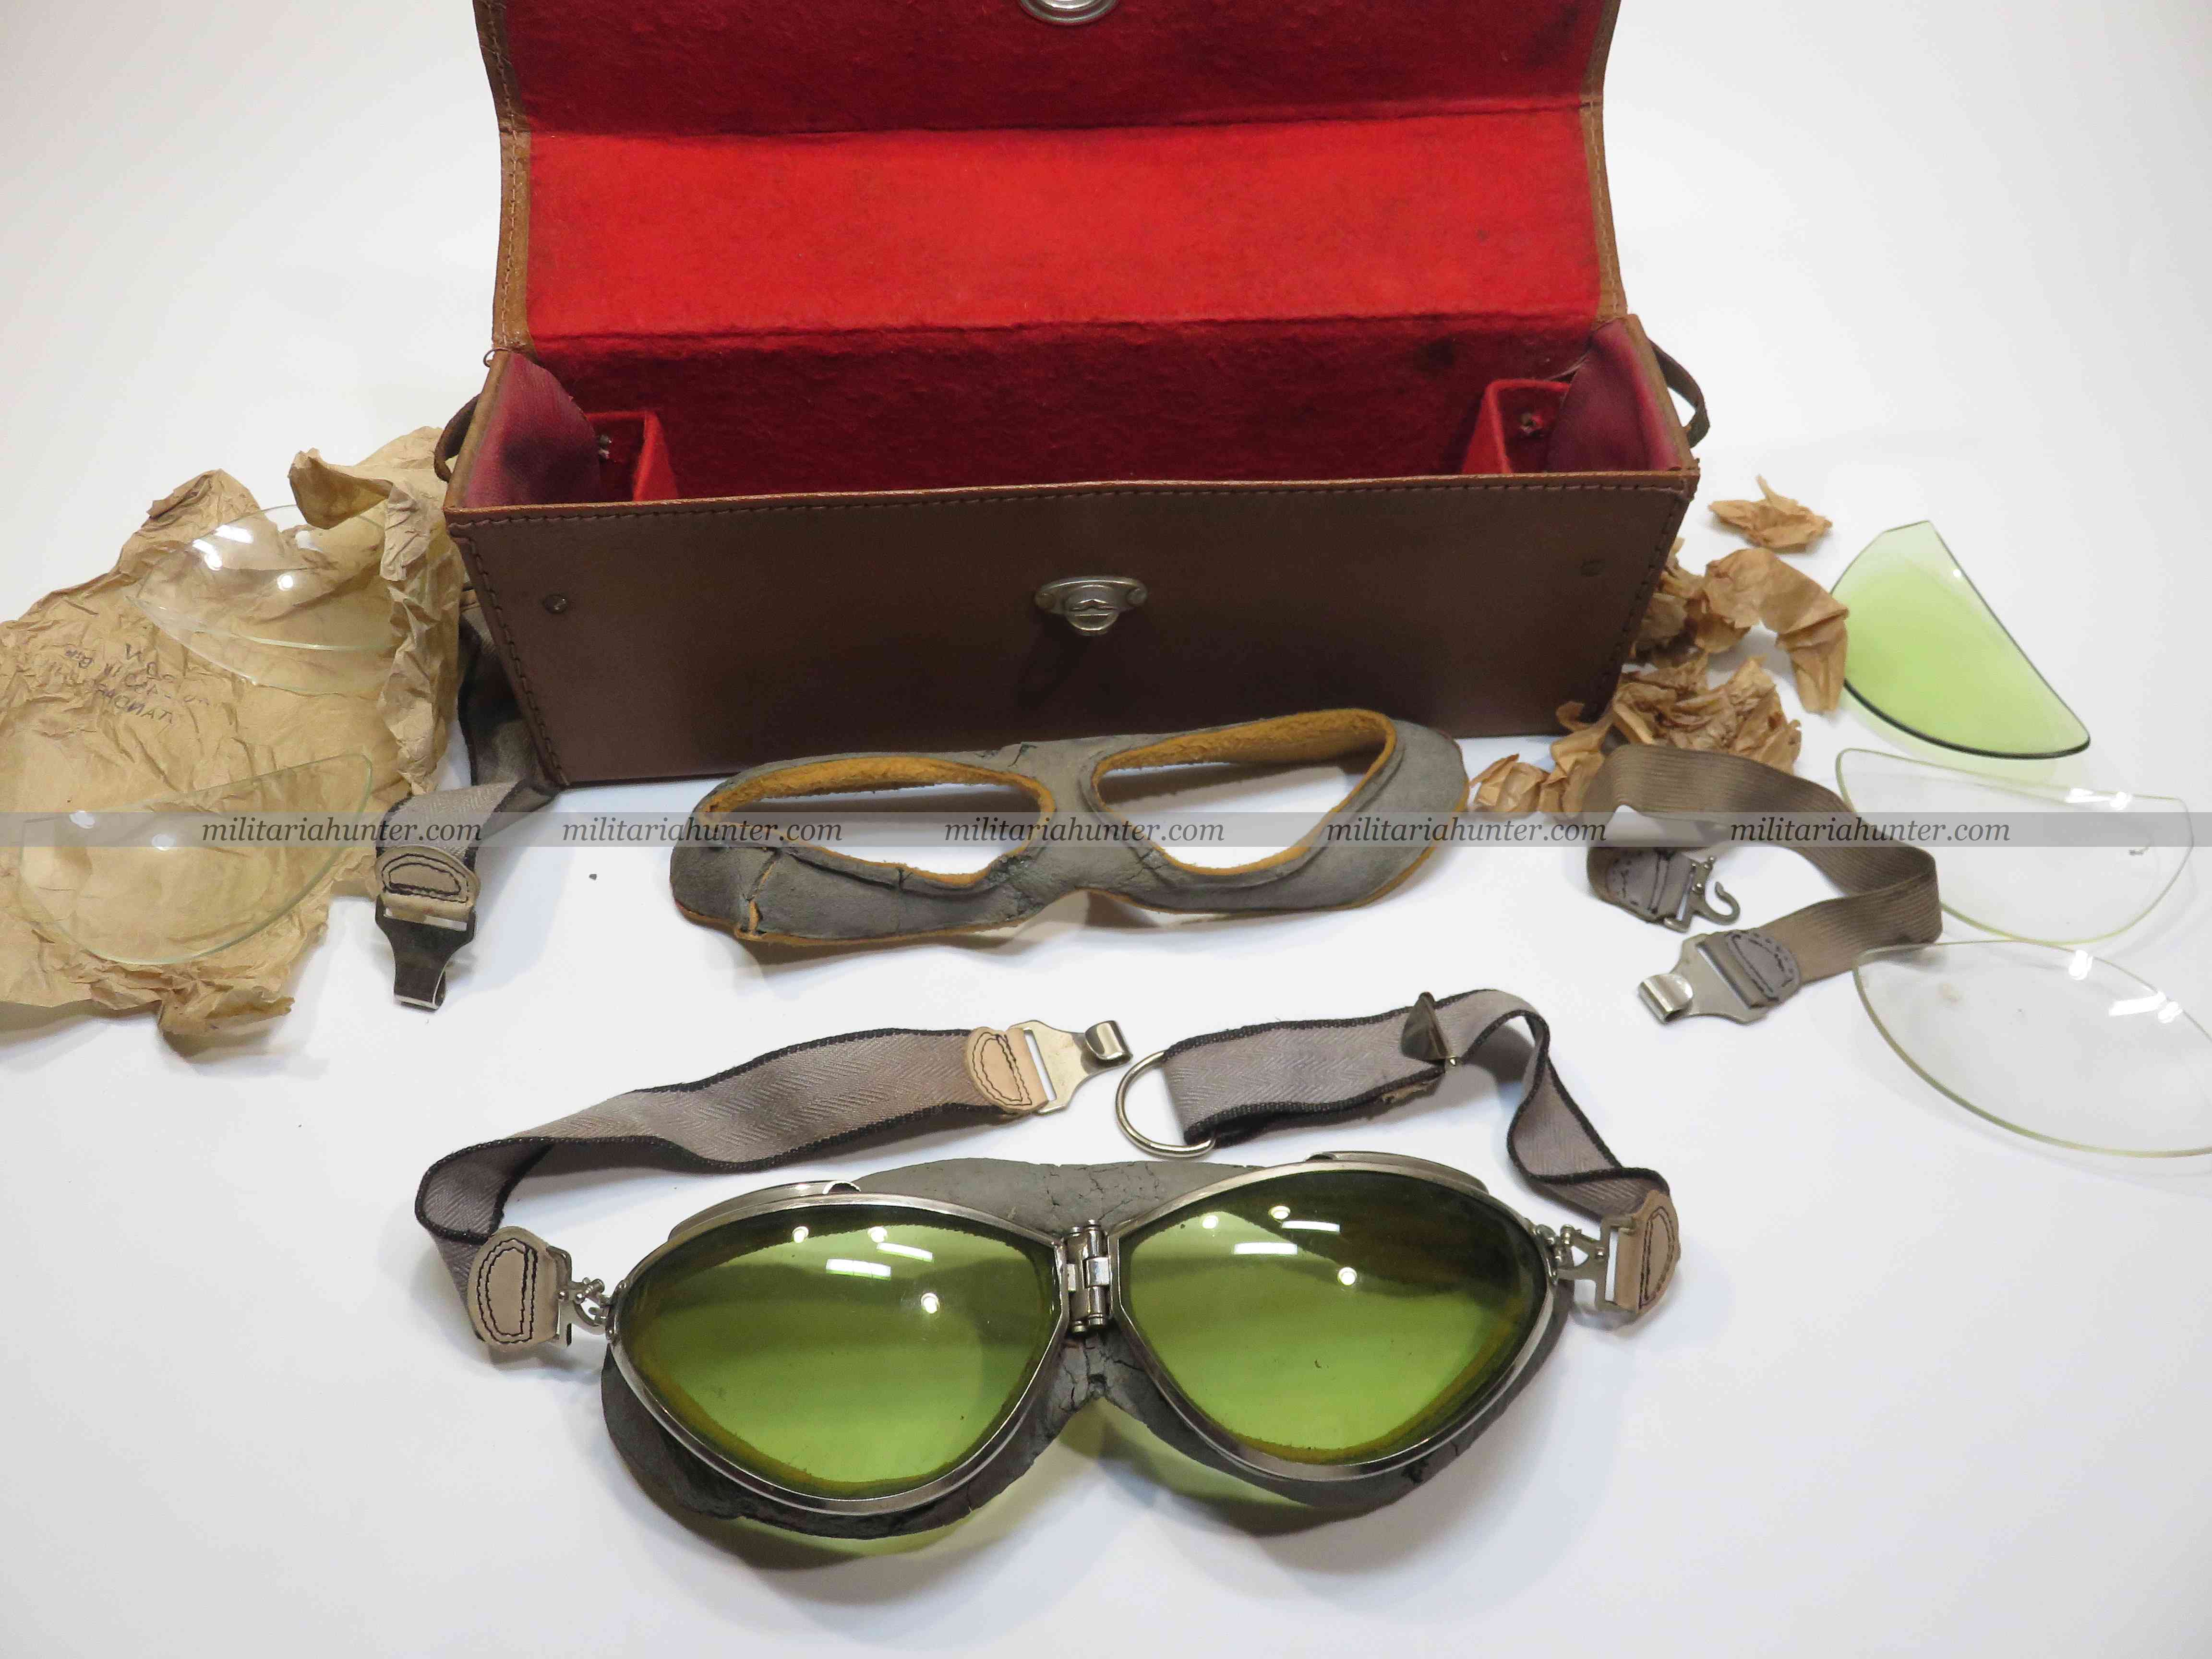 militaria : Lunettes de pilote Aviation France 40 - ww2 french pilot flying goggles